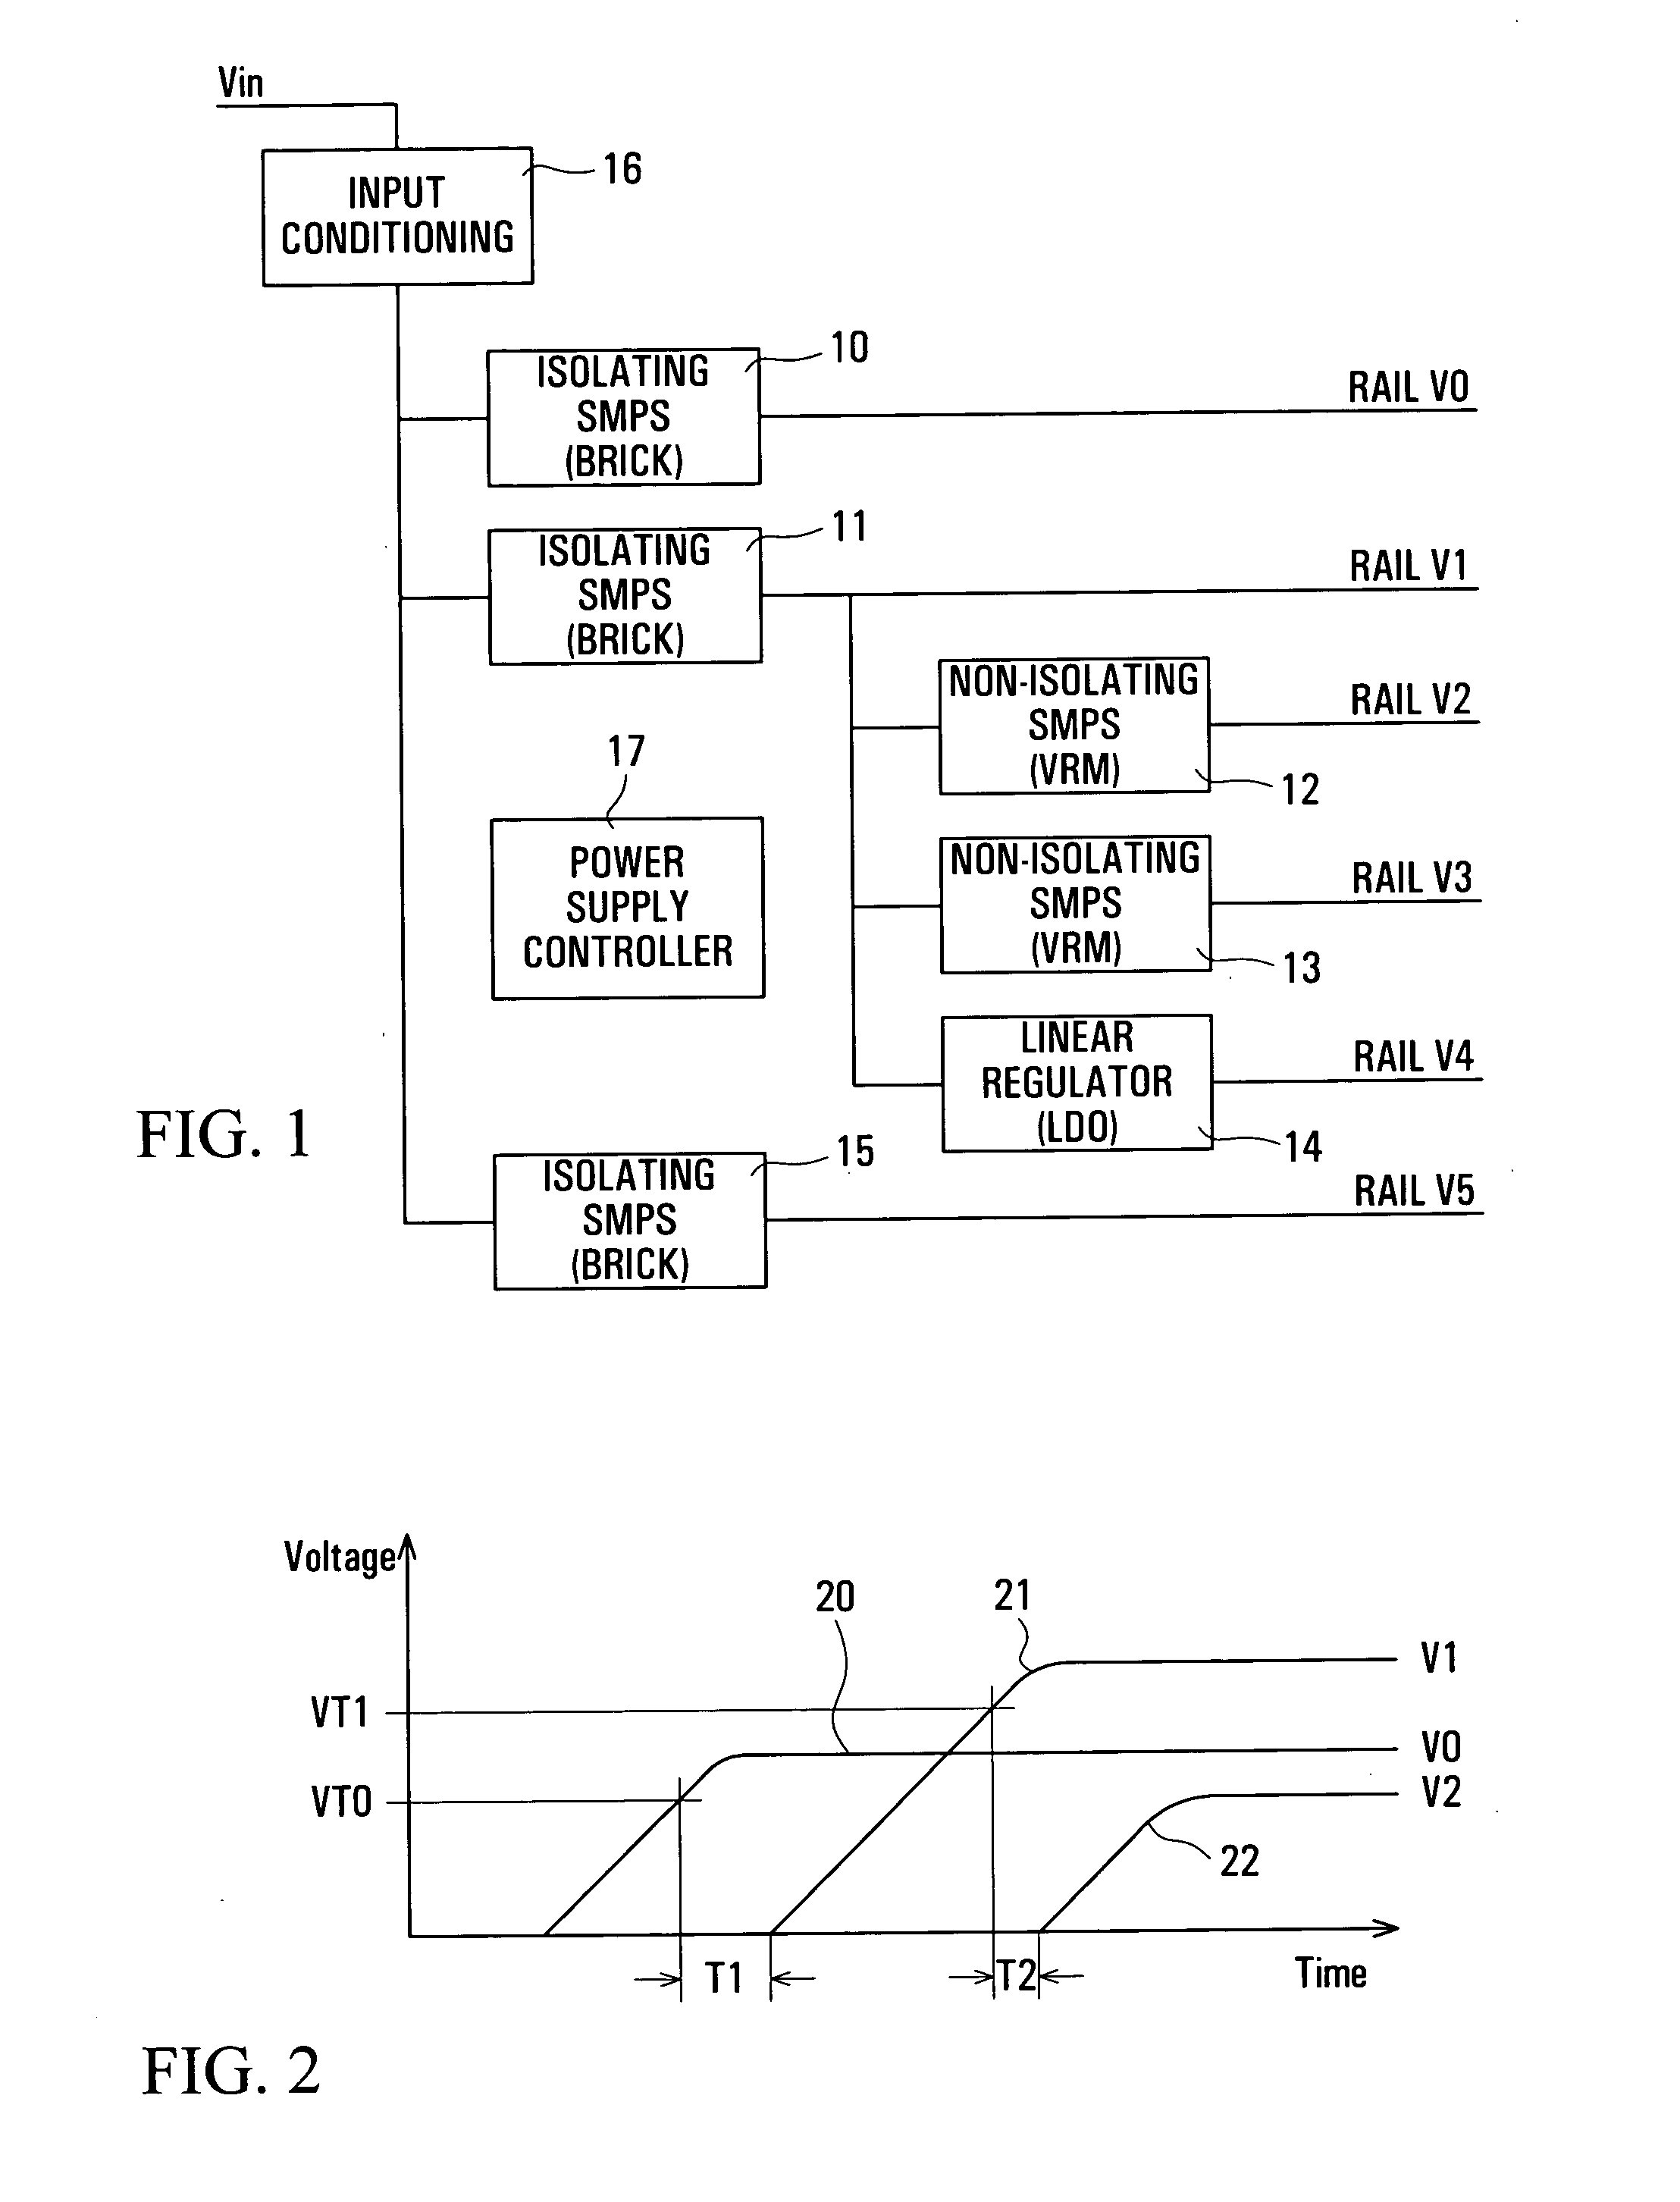 Graphical interface for configuring a power supply controller